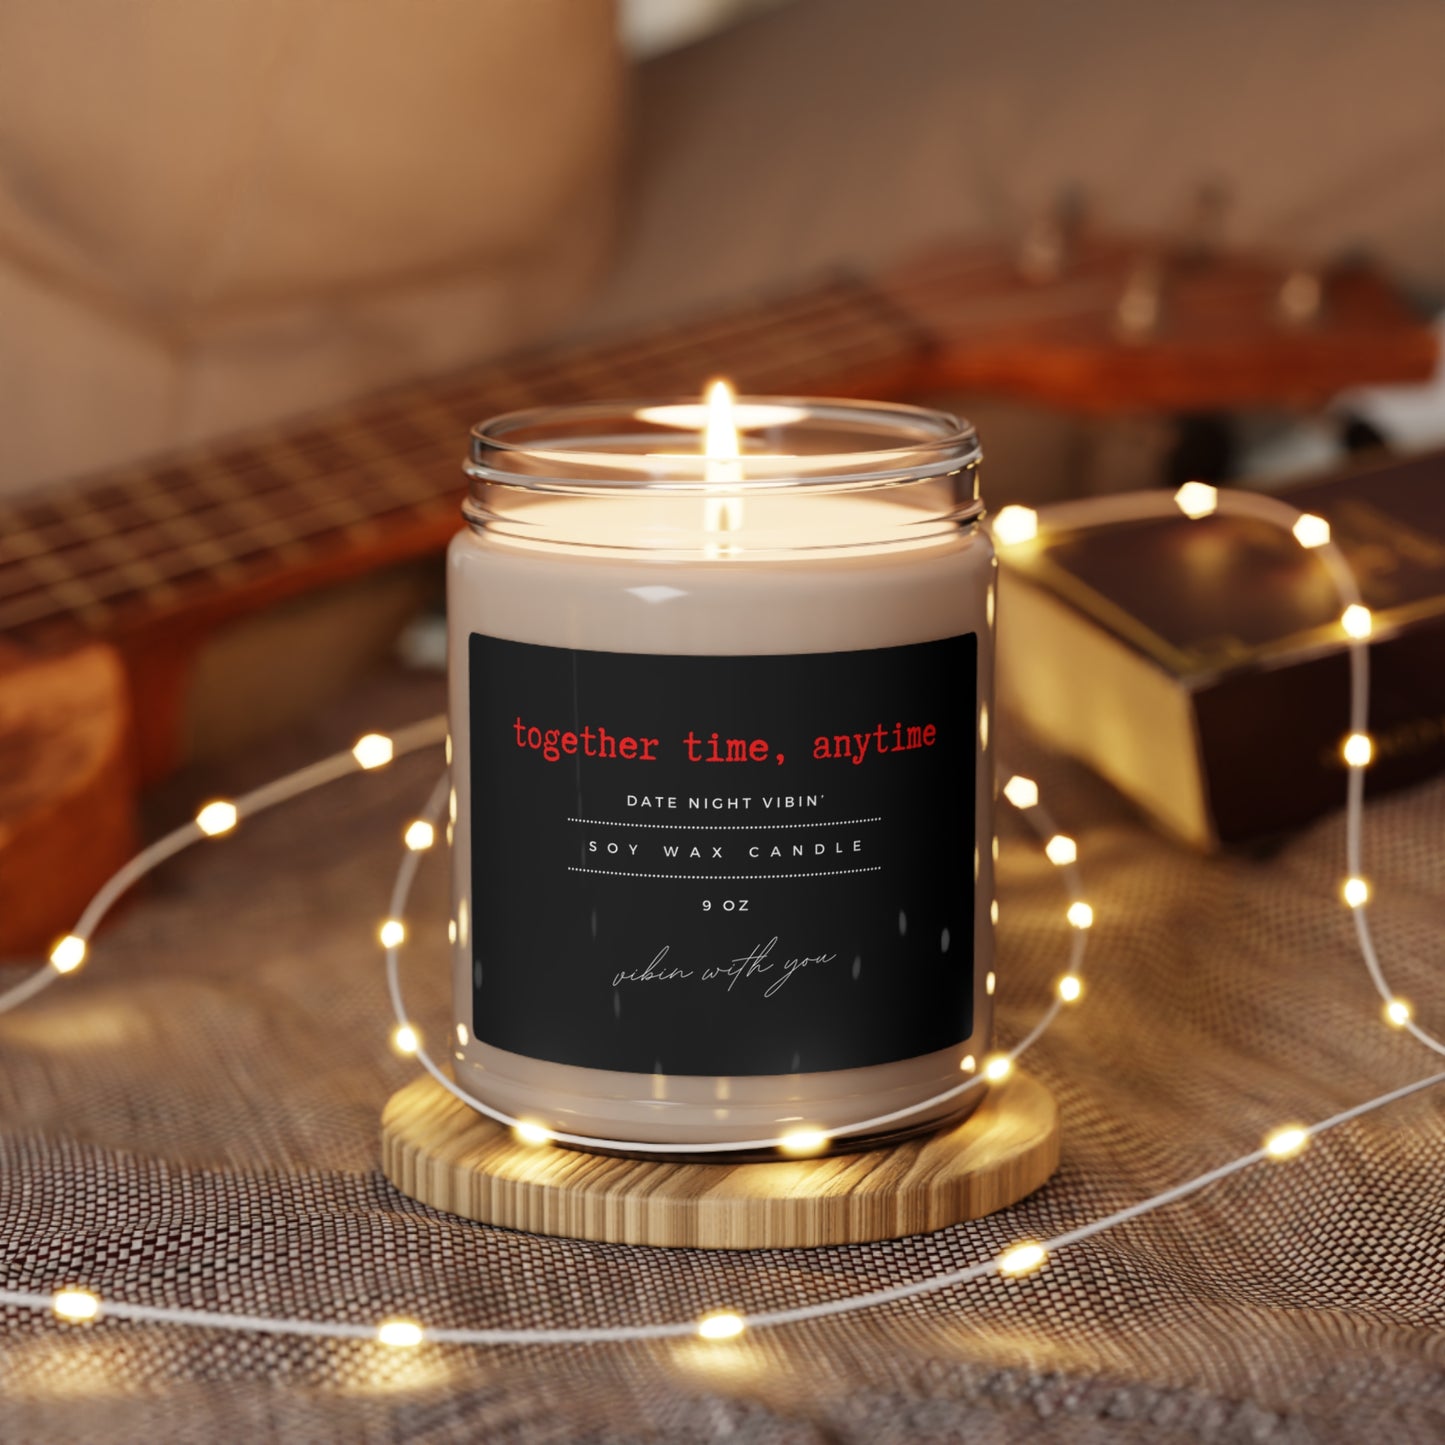 Together Time, Anytime Romantic Date Night Scented Soy Candle, 9oz - Various Scents